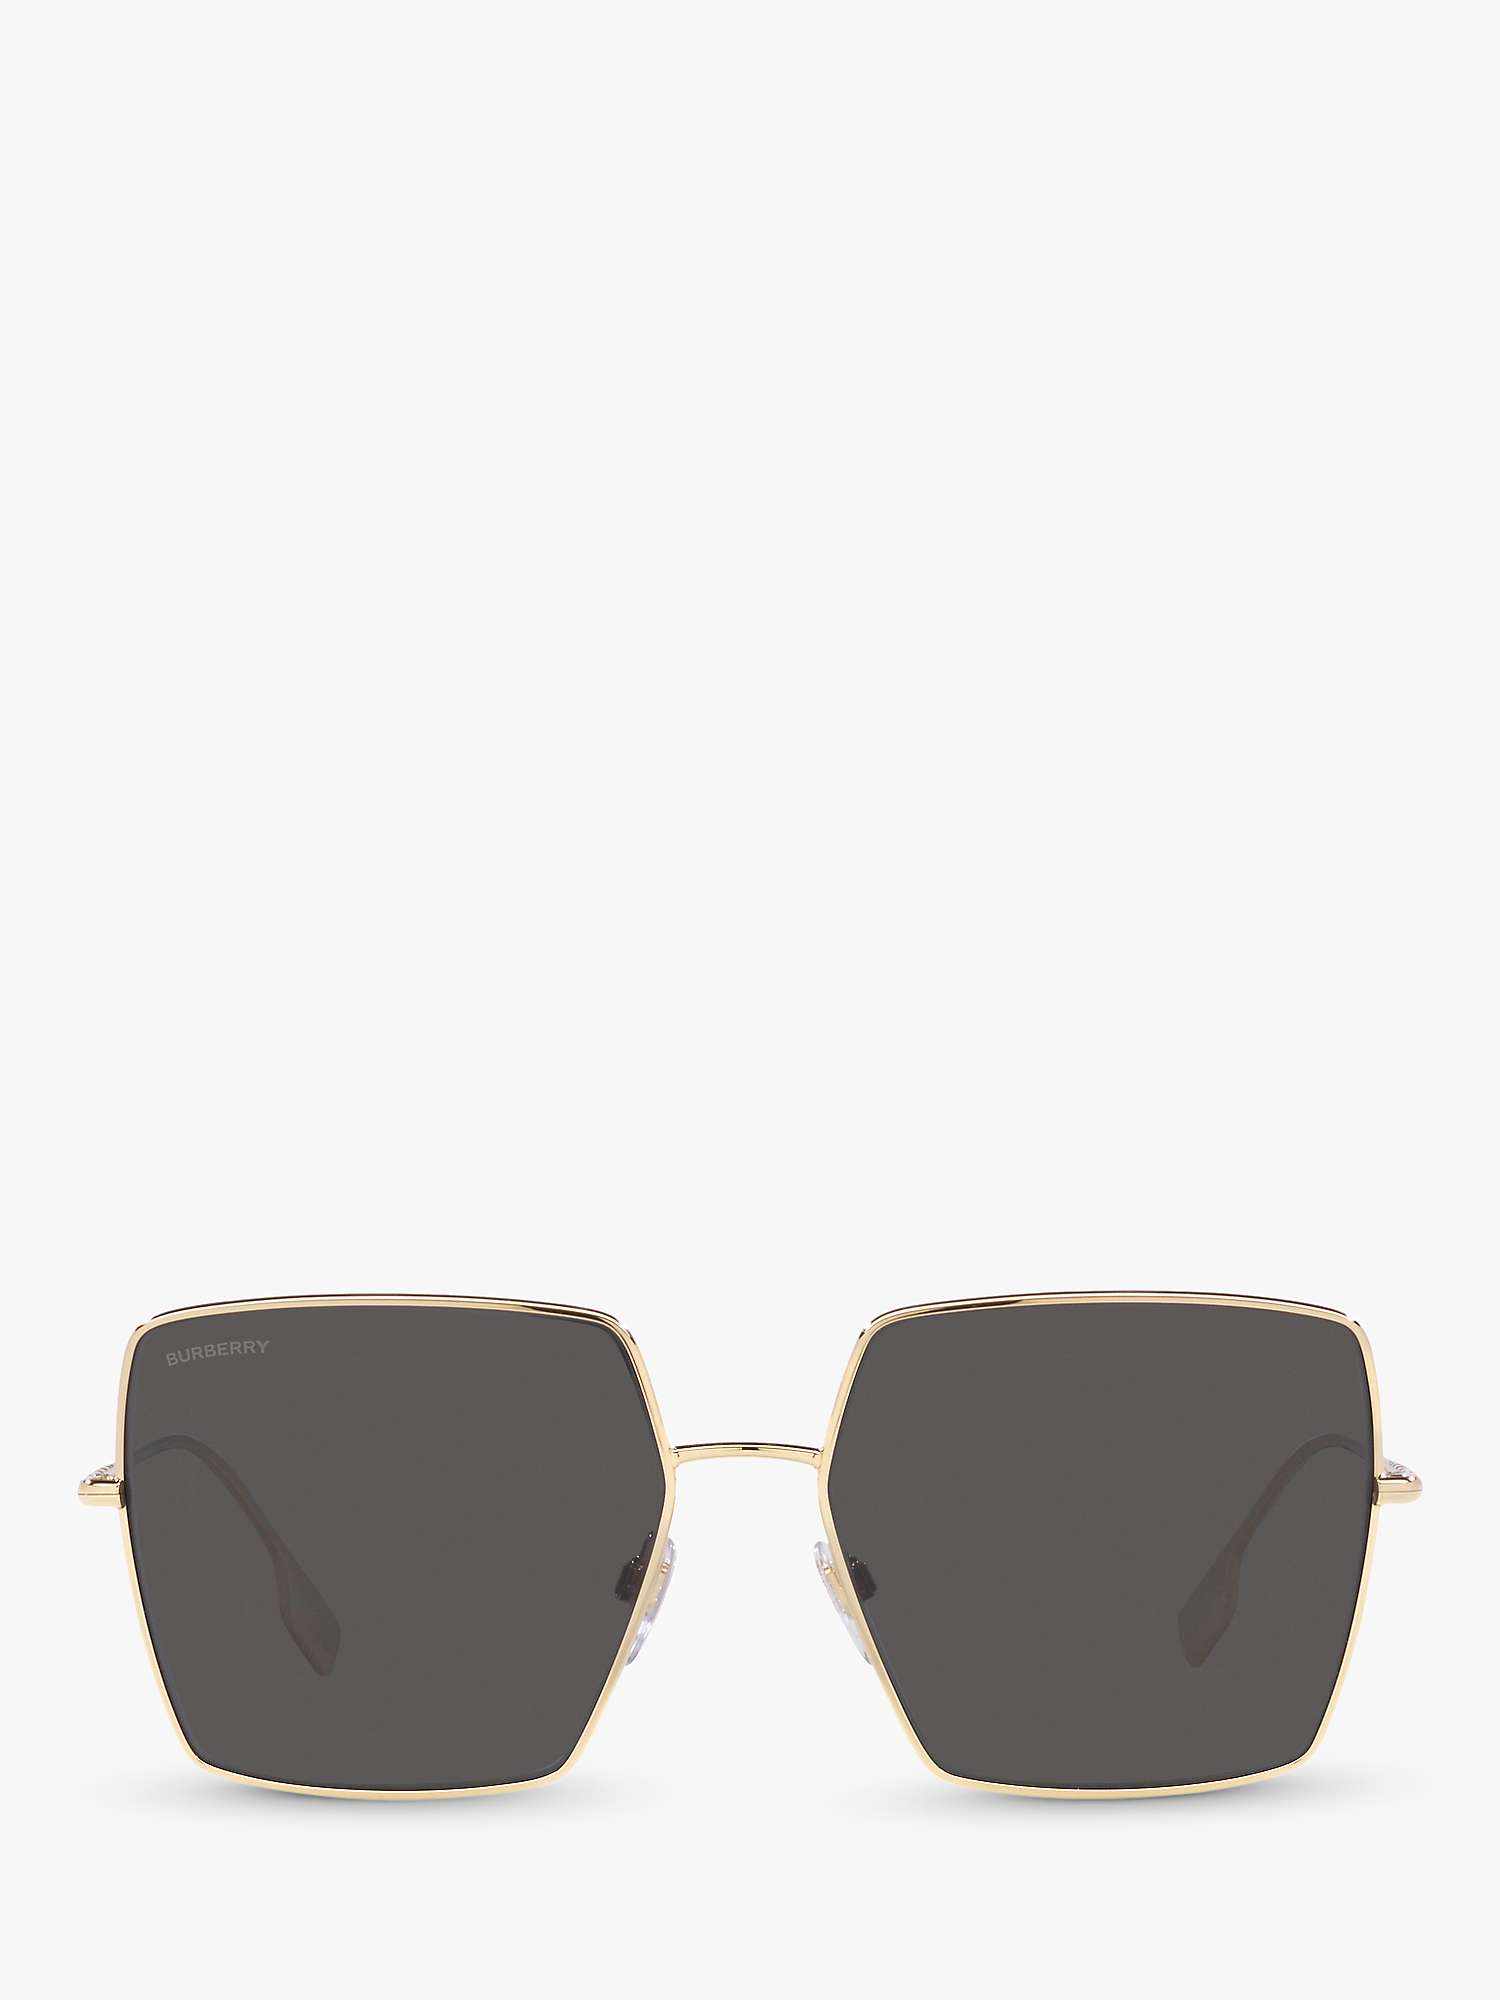 Buy Burberry BE3133 Women's Daphne Square Sunglasses, Gold/Grey Online at johnlewis.com